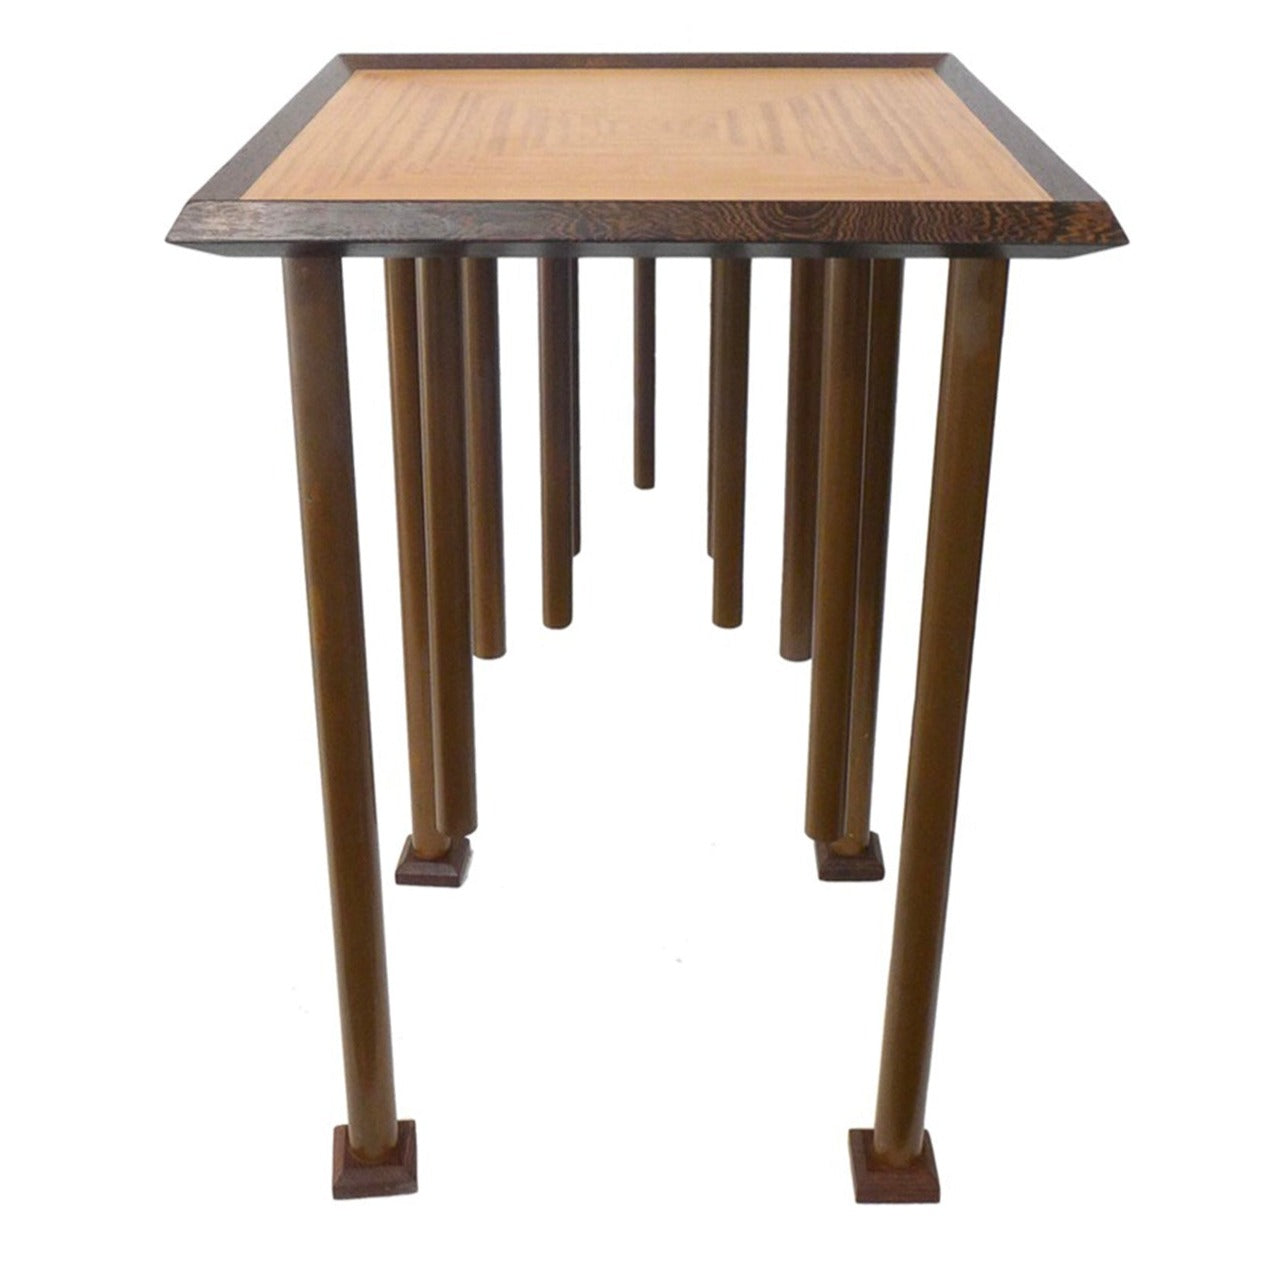 Tall Wood & Copper Square Pedestal Table